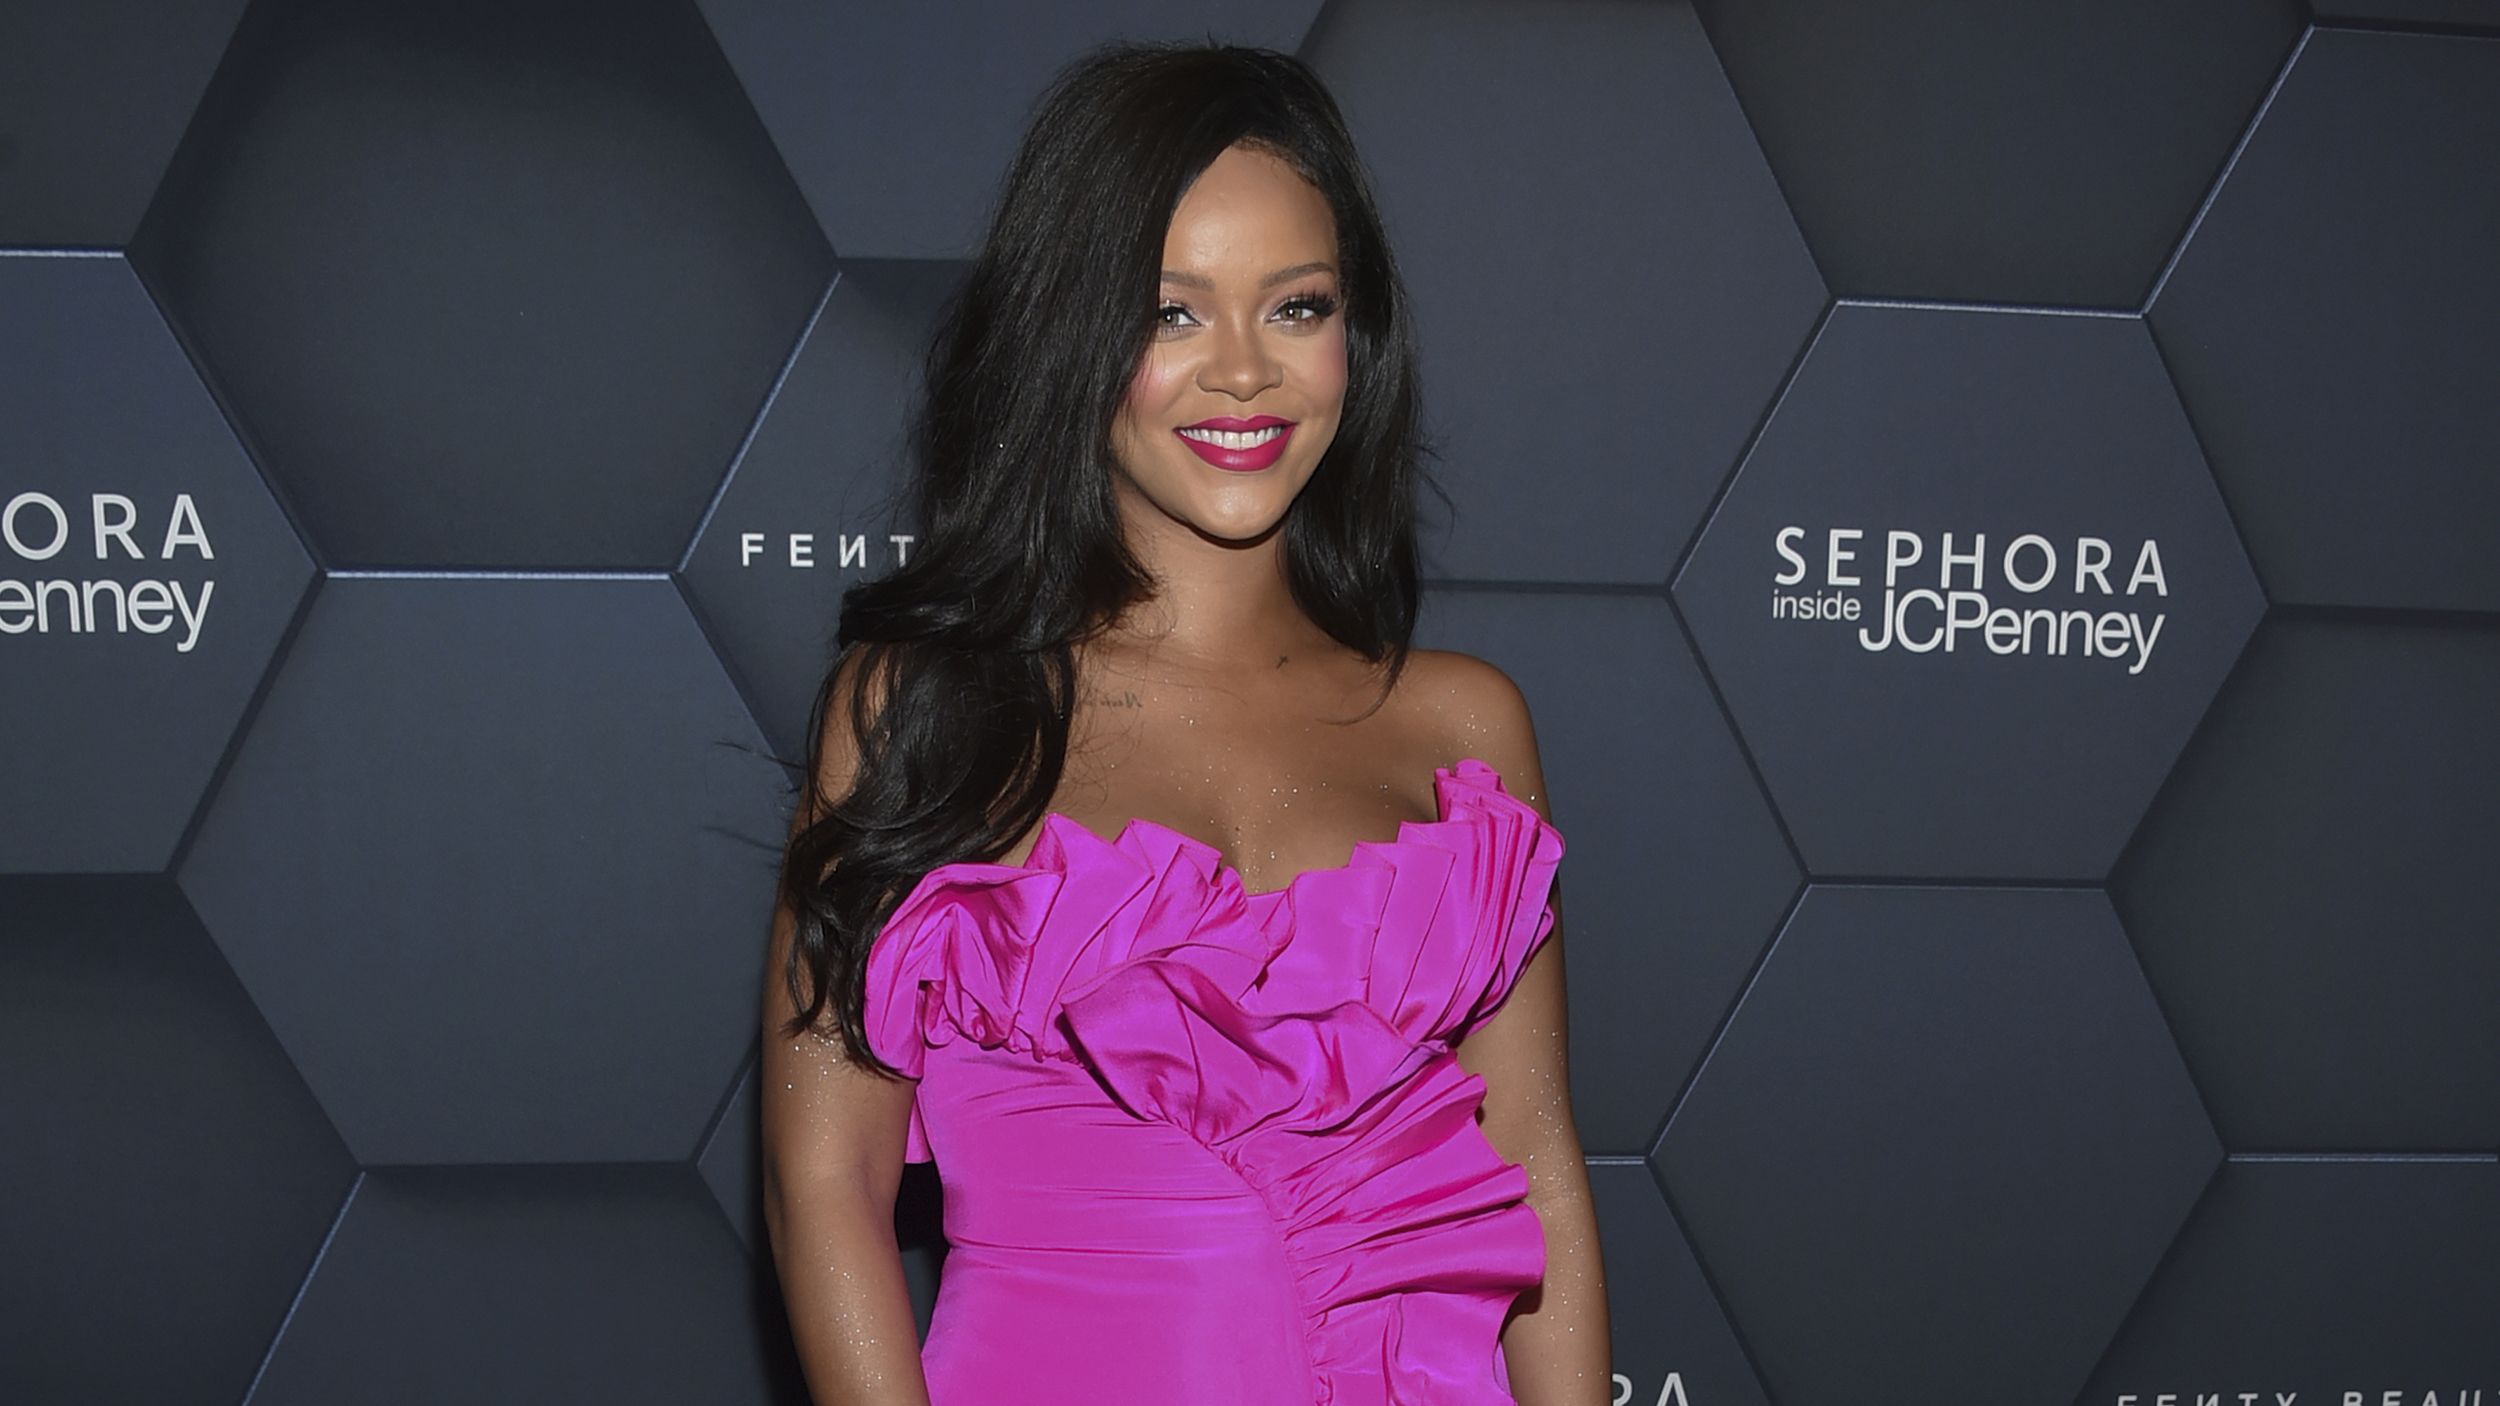 Why Rihanna's New Fenty Brand With LVMH Is Such a Big Deal